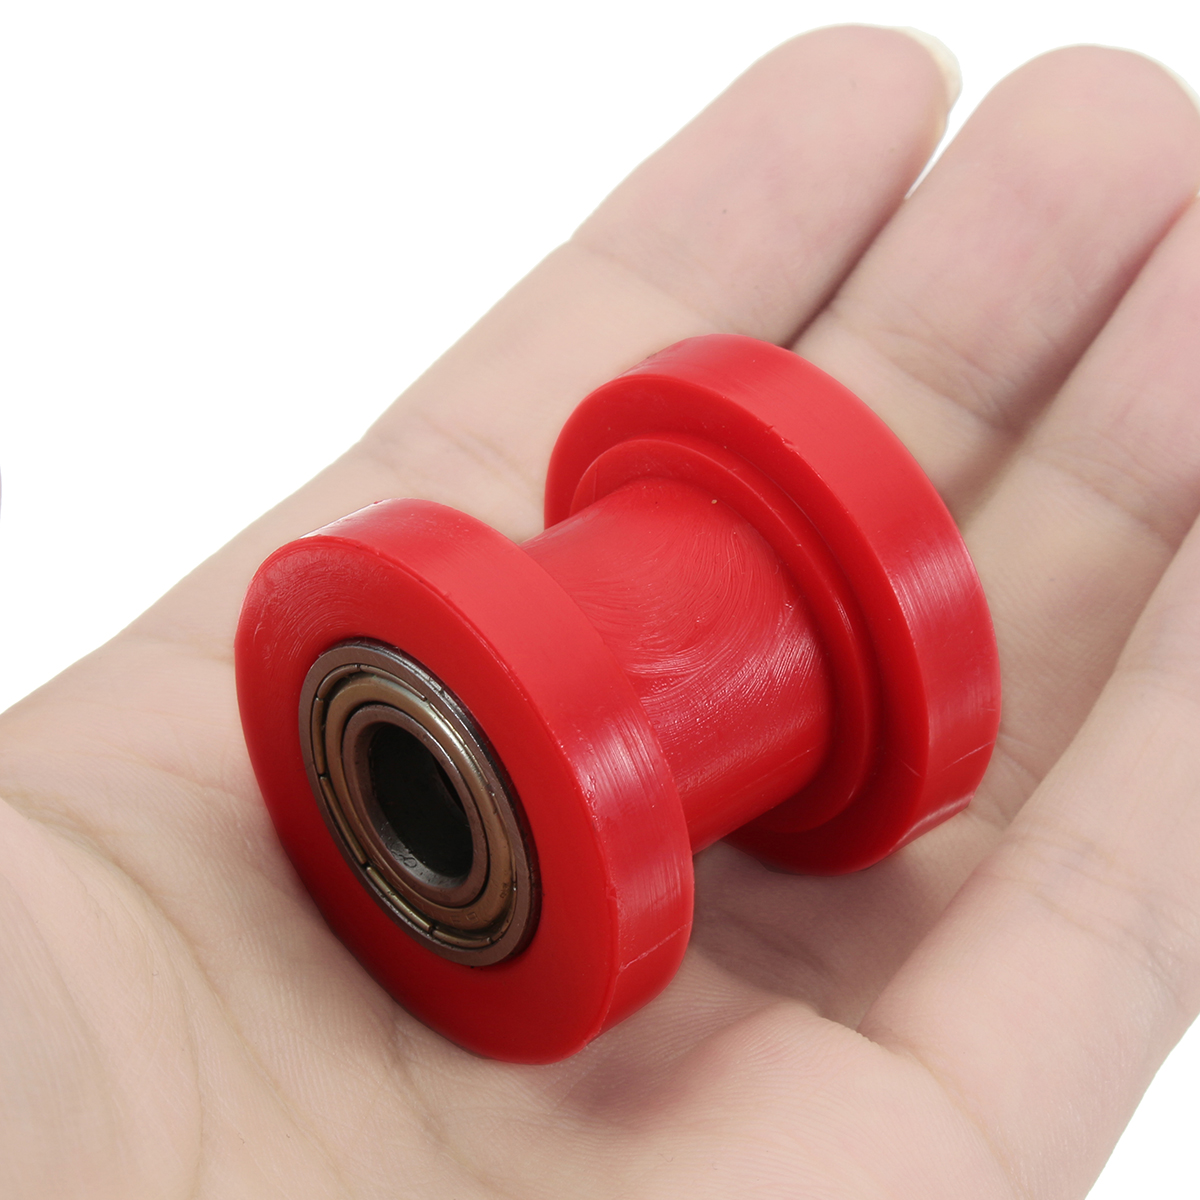 10Mm Chain Roller Slider Tensioner Wheel Guide for Pit Dirt Mini Bike Motorcycle Black/Red/White - Auto GoShop